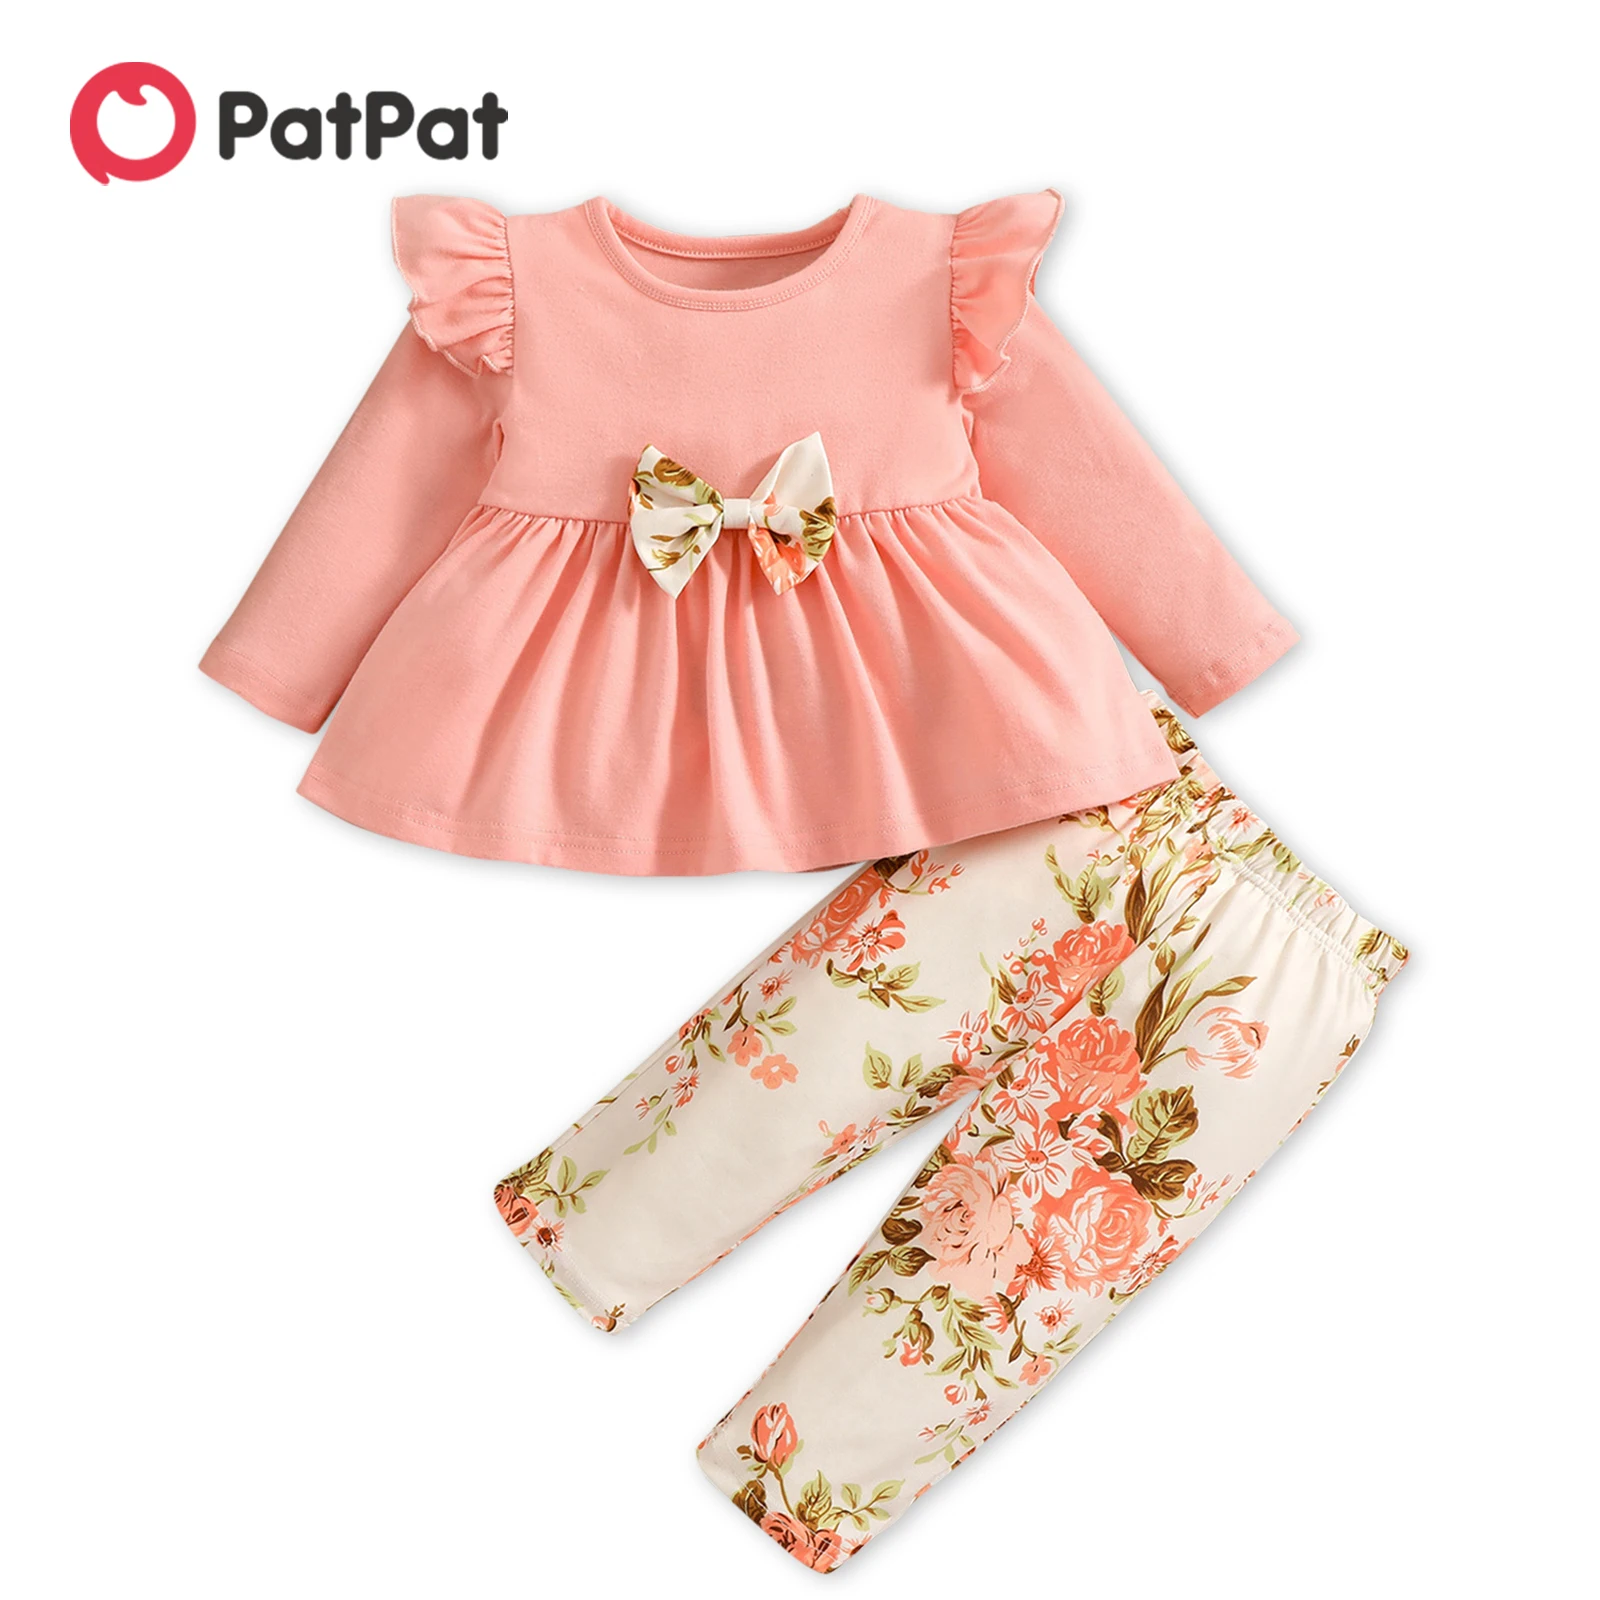 

PatPat 2pcs Baby Dark Green Cotton Long-sleeve Bowknot Top and All Over Leaves Print Trousers Set